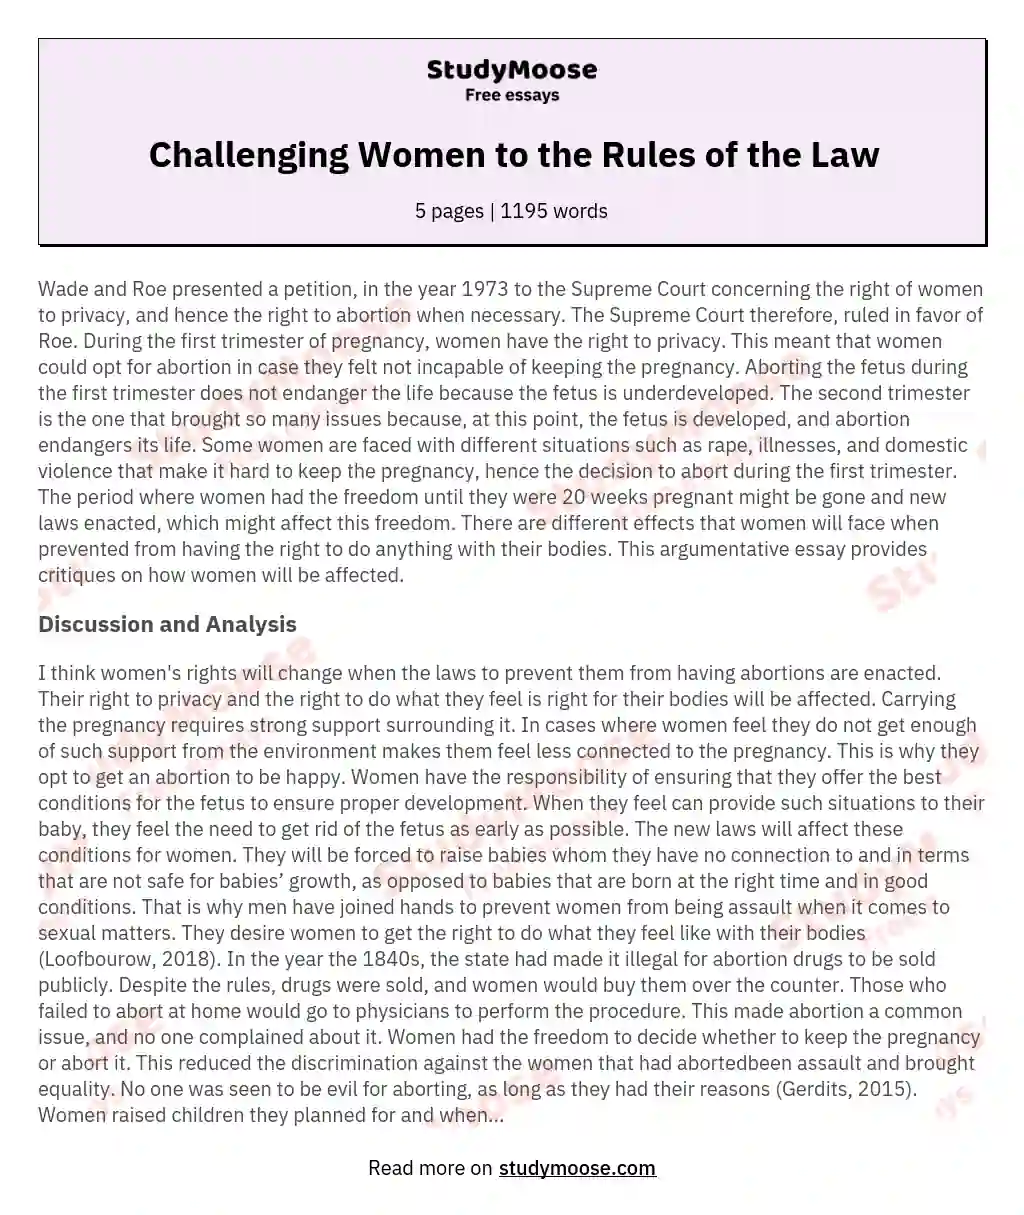 Challenging Women to the Rules of the Law essay